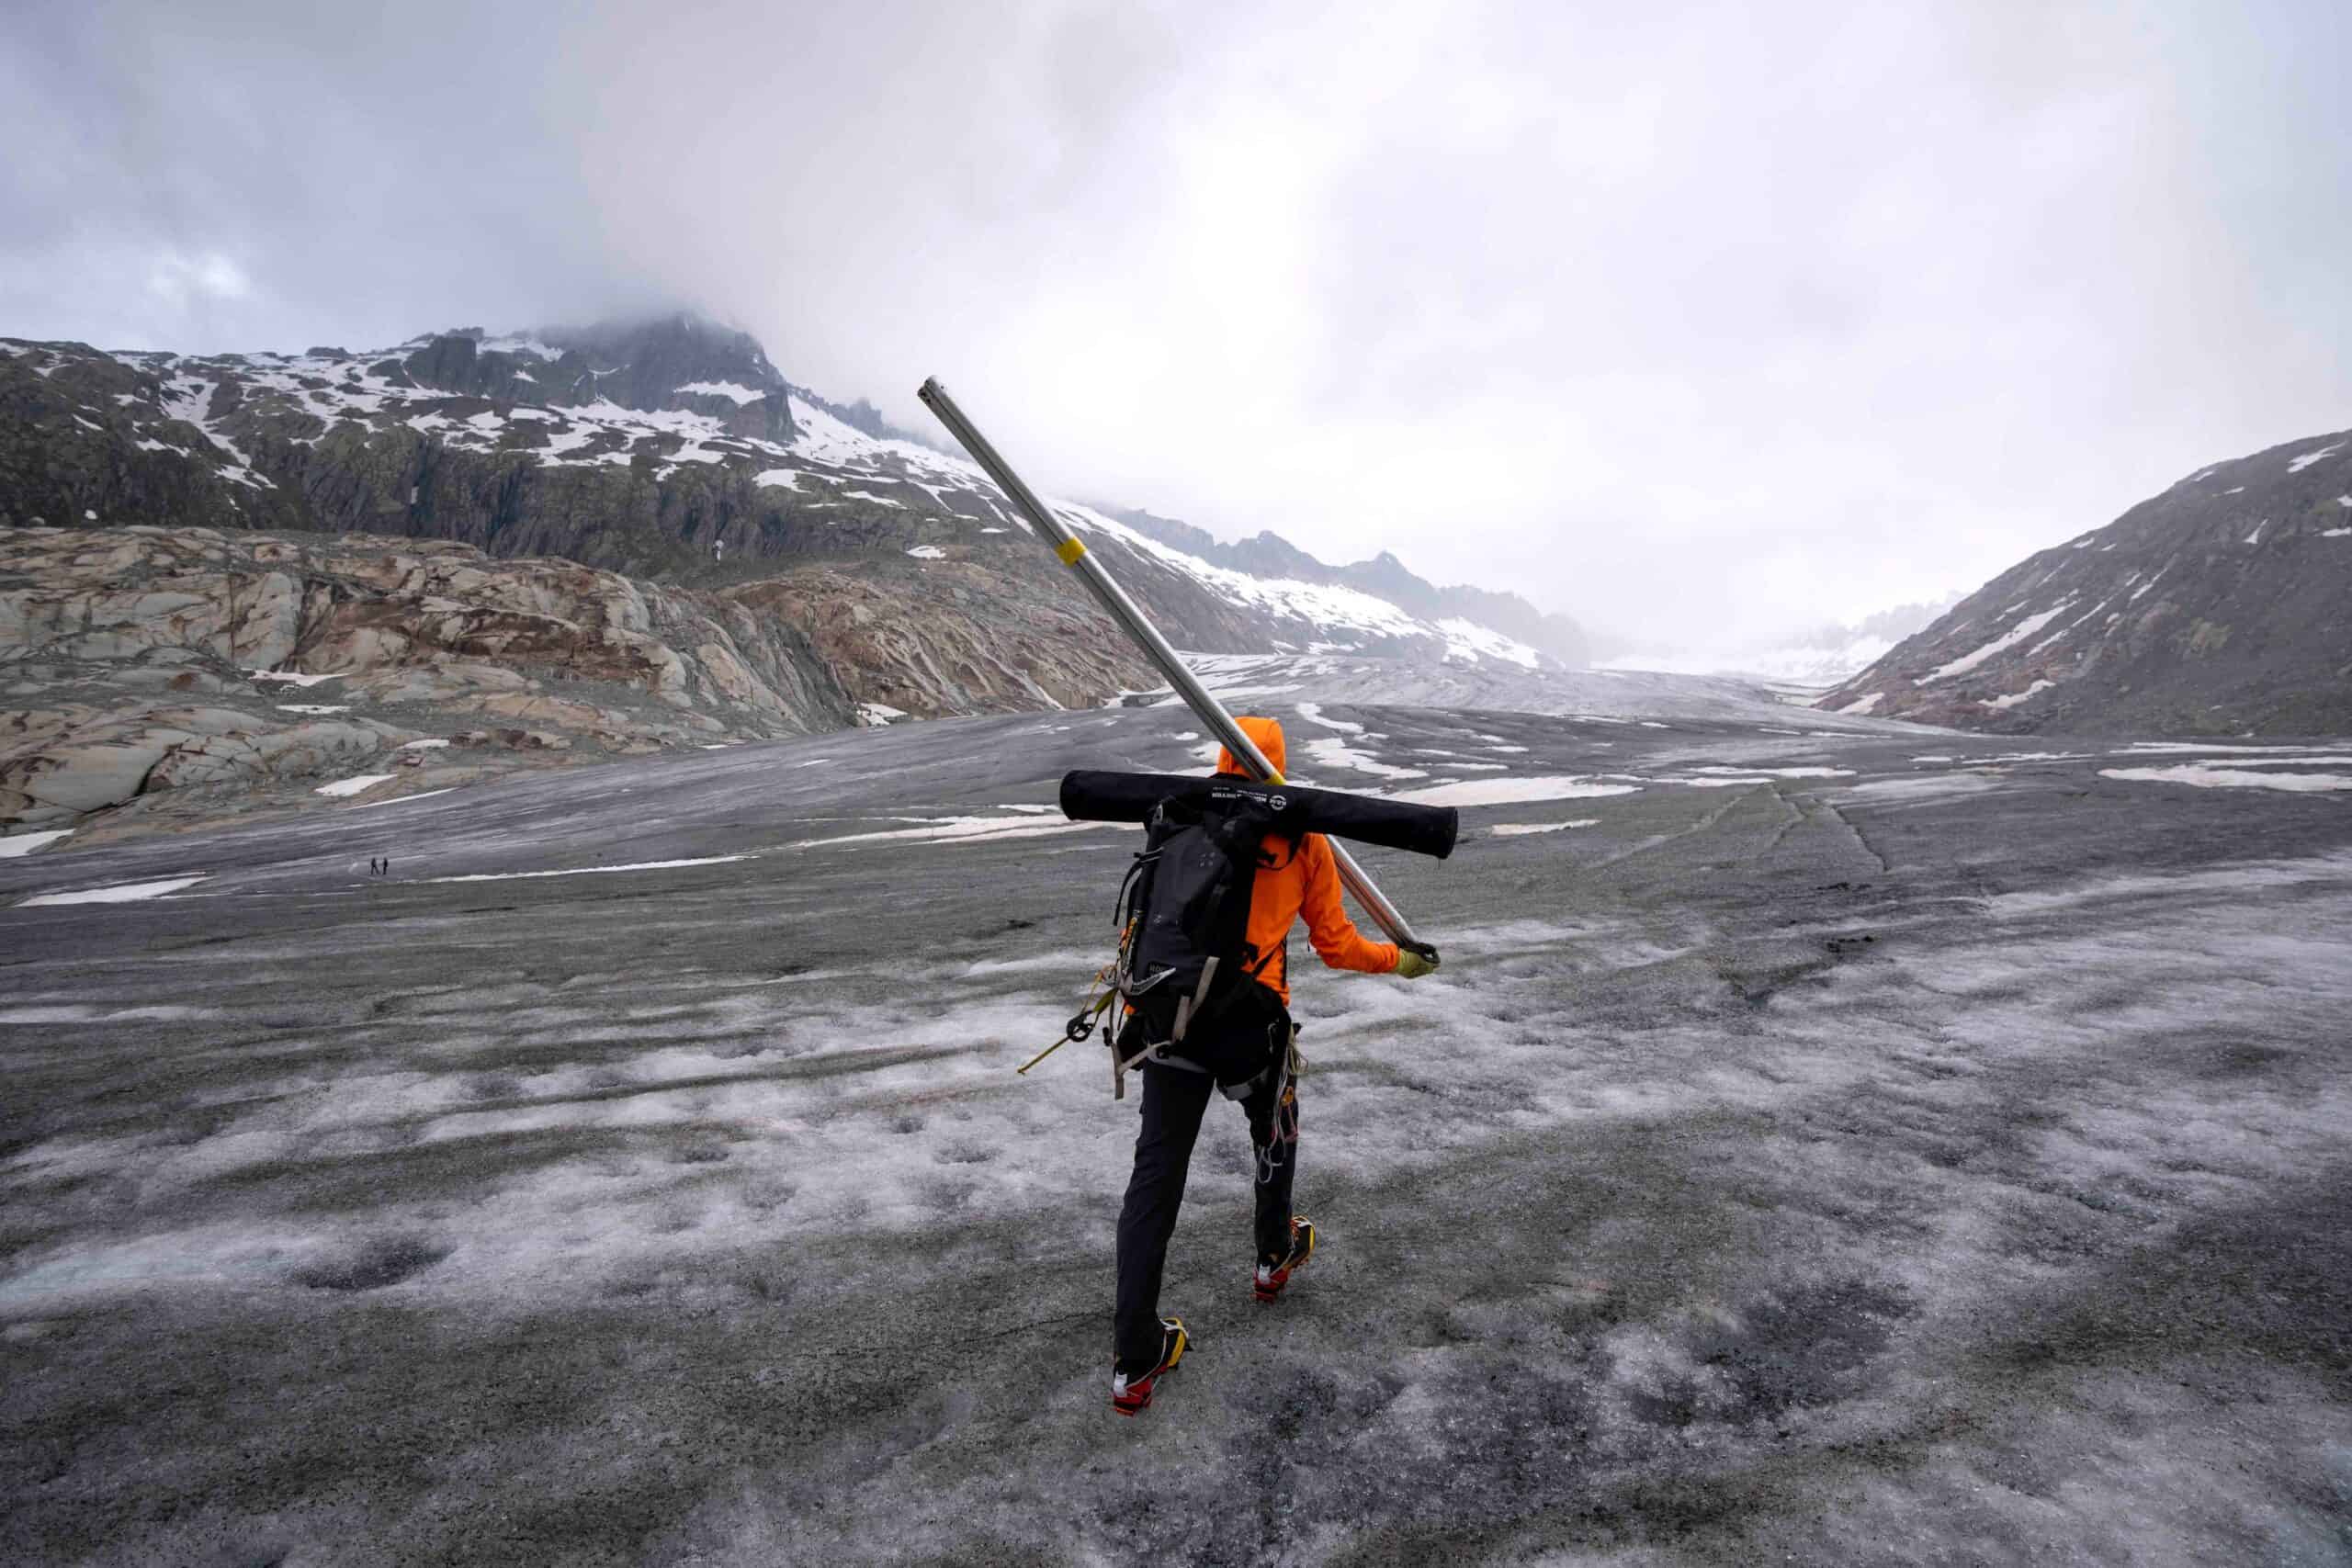 Switzerland backs new climate measures in referendum as glaciers melt ‘at an alarming rate’